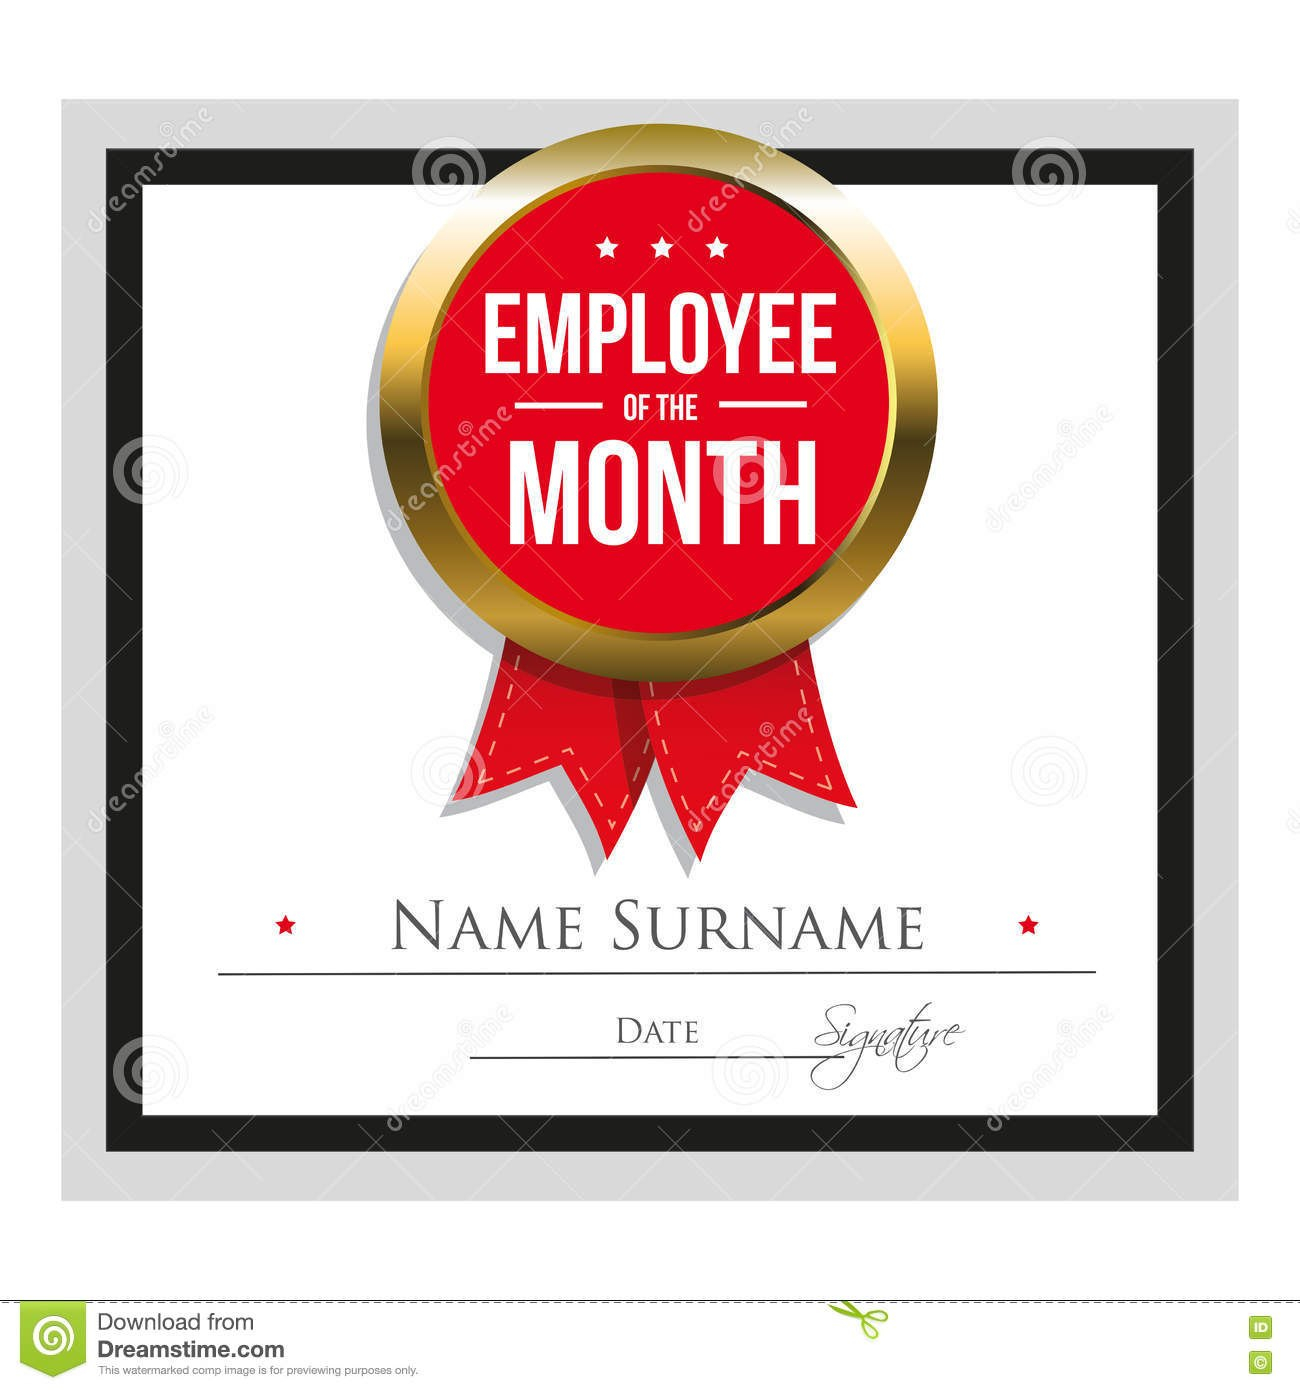 Employee Of The Month Certificate Template Stock Vector throughout Employee Of The Month Certificate Template With Picture